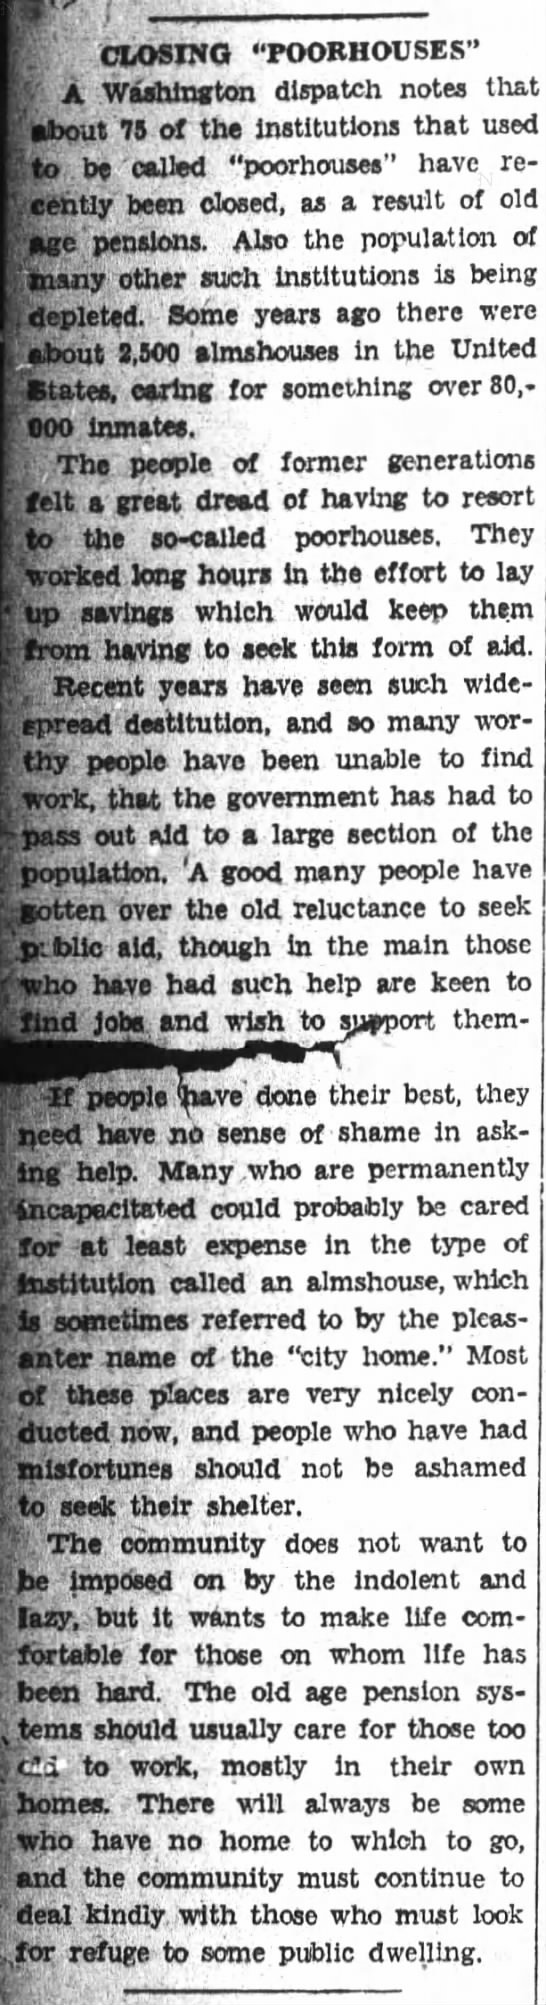 Article about why many poorhouses are closing, 1938 - 